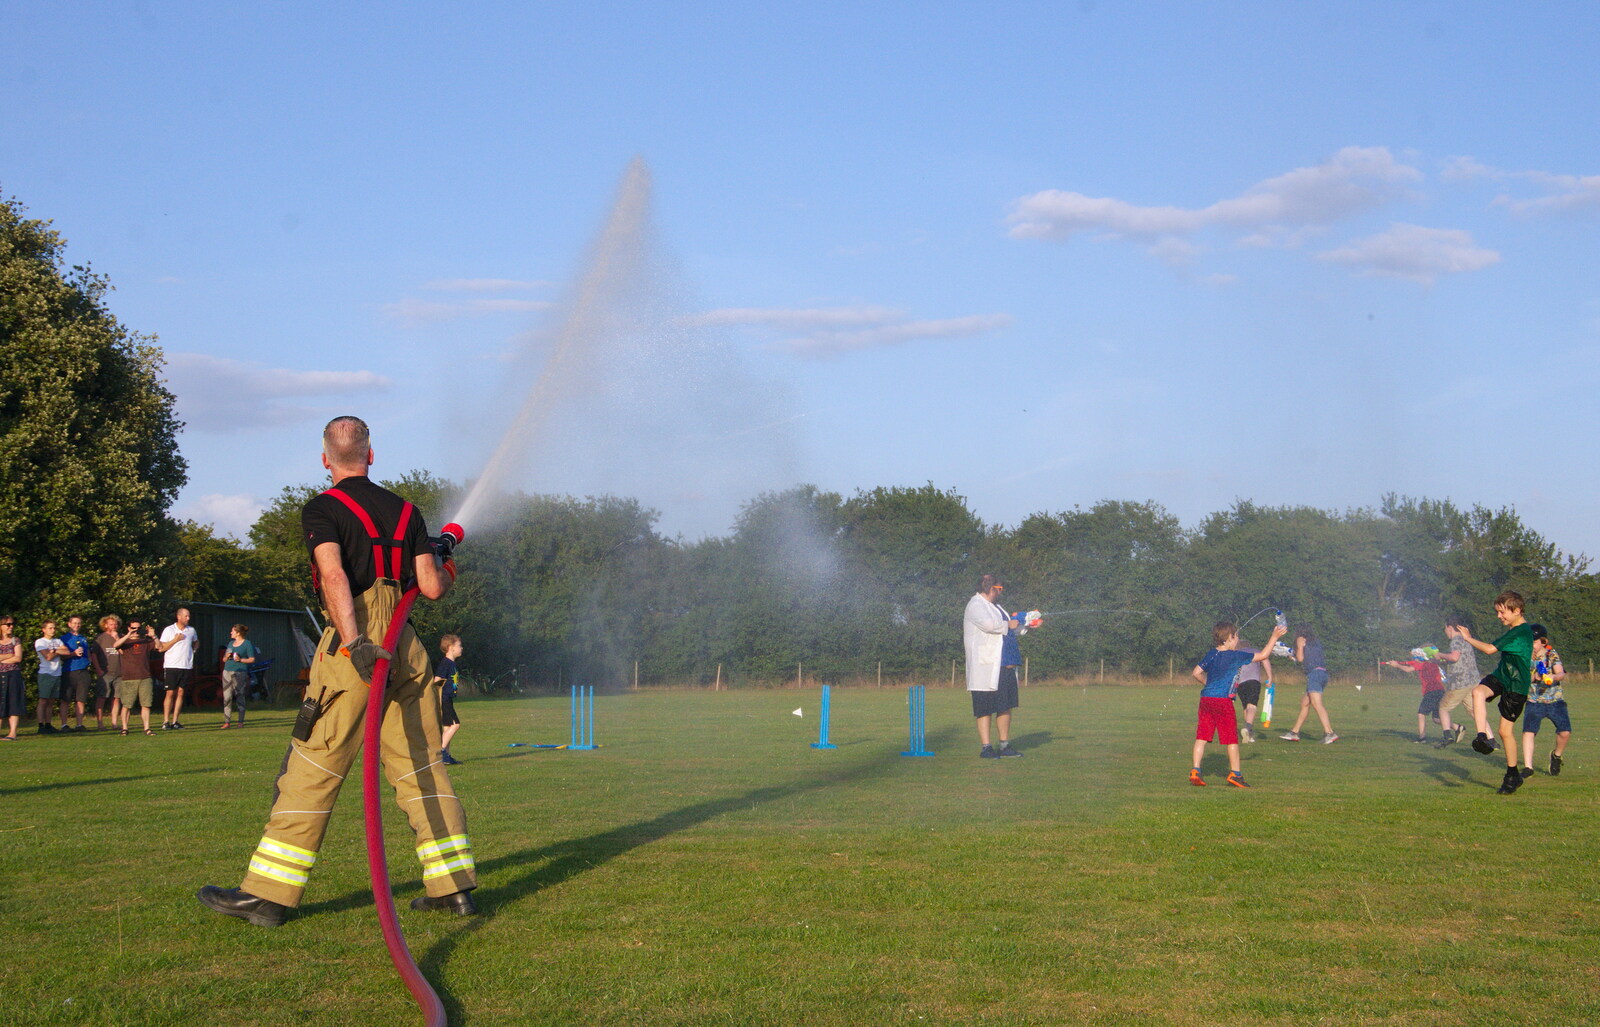 The fireman keeps the spraying going from A Water Fight with a Fire Engine, Eye Cricket Club, Suffolk - 5th August 2019